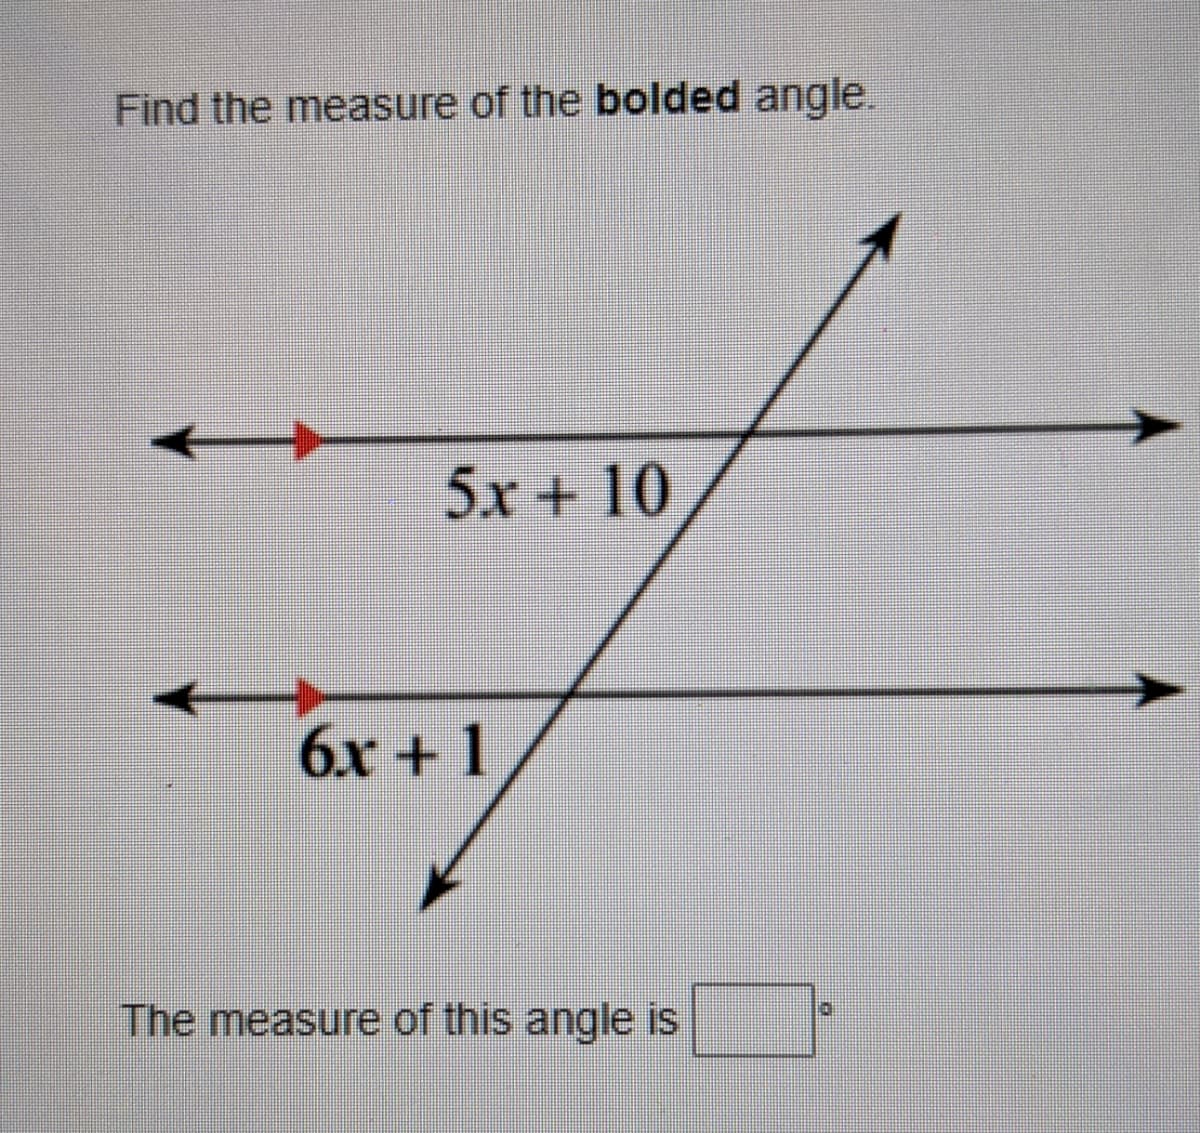 Find the measure of the bolded angle.
5x + 10
6x + 1
The measure of this angle is
